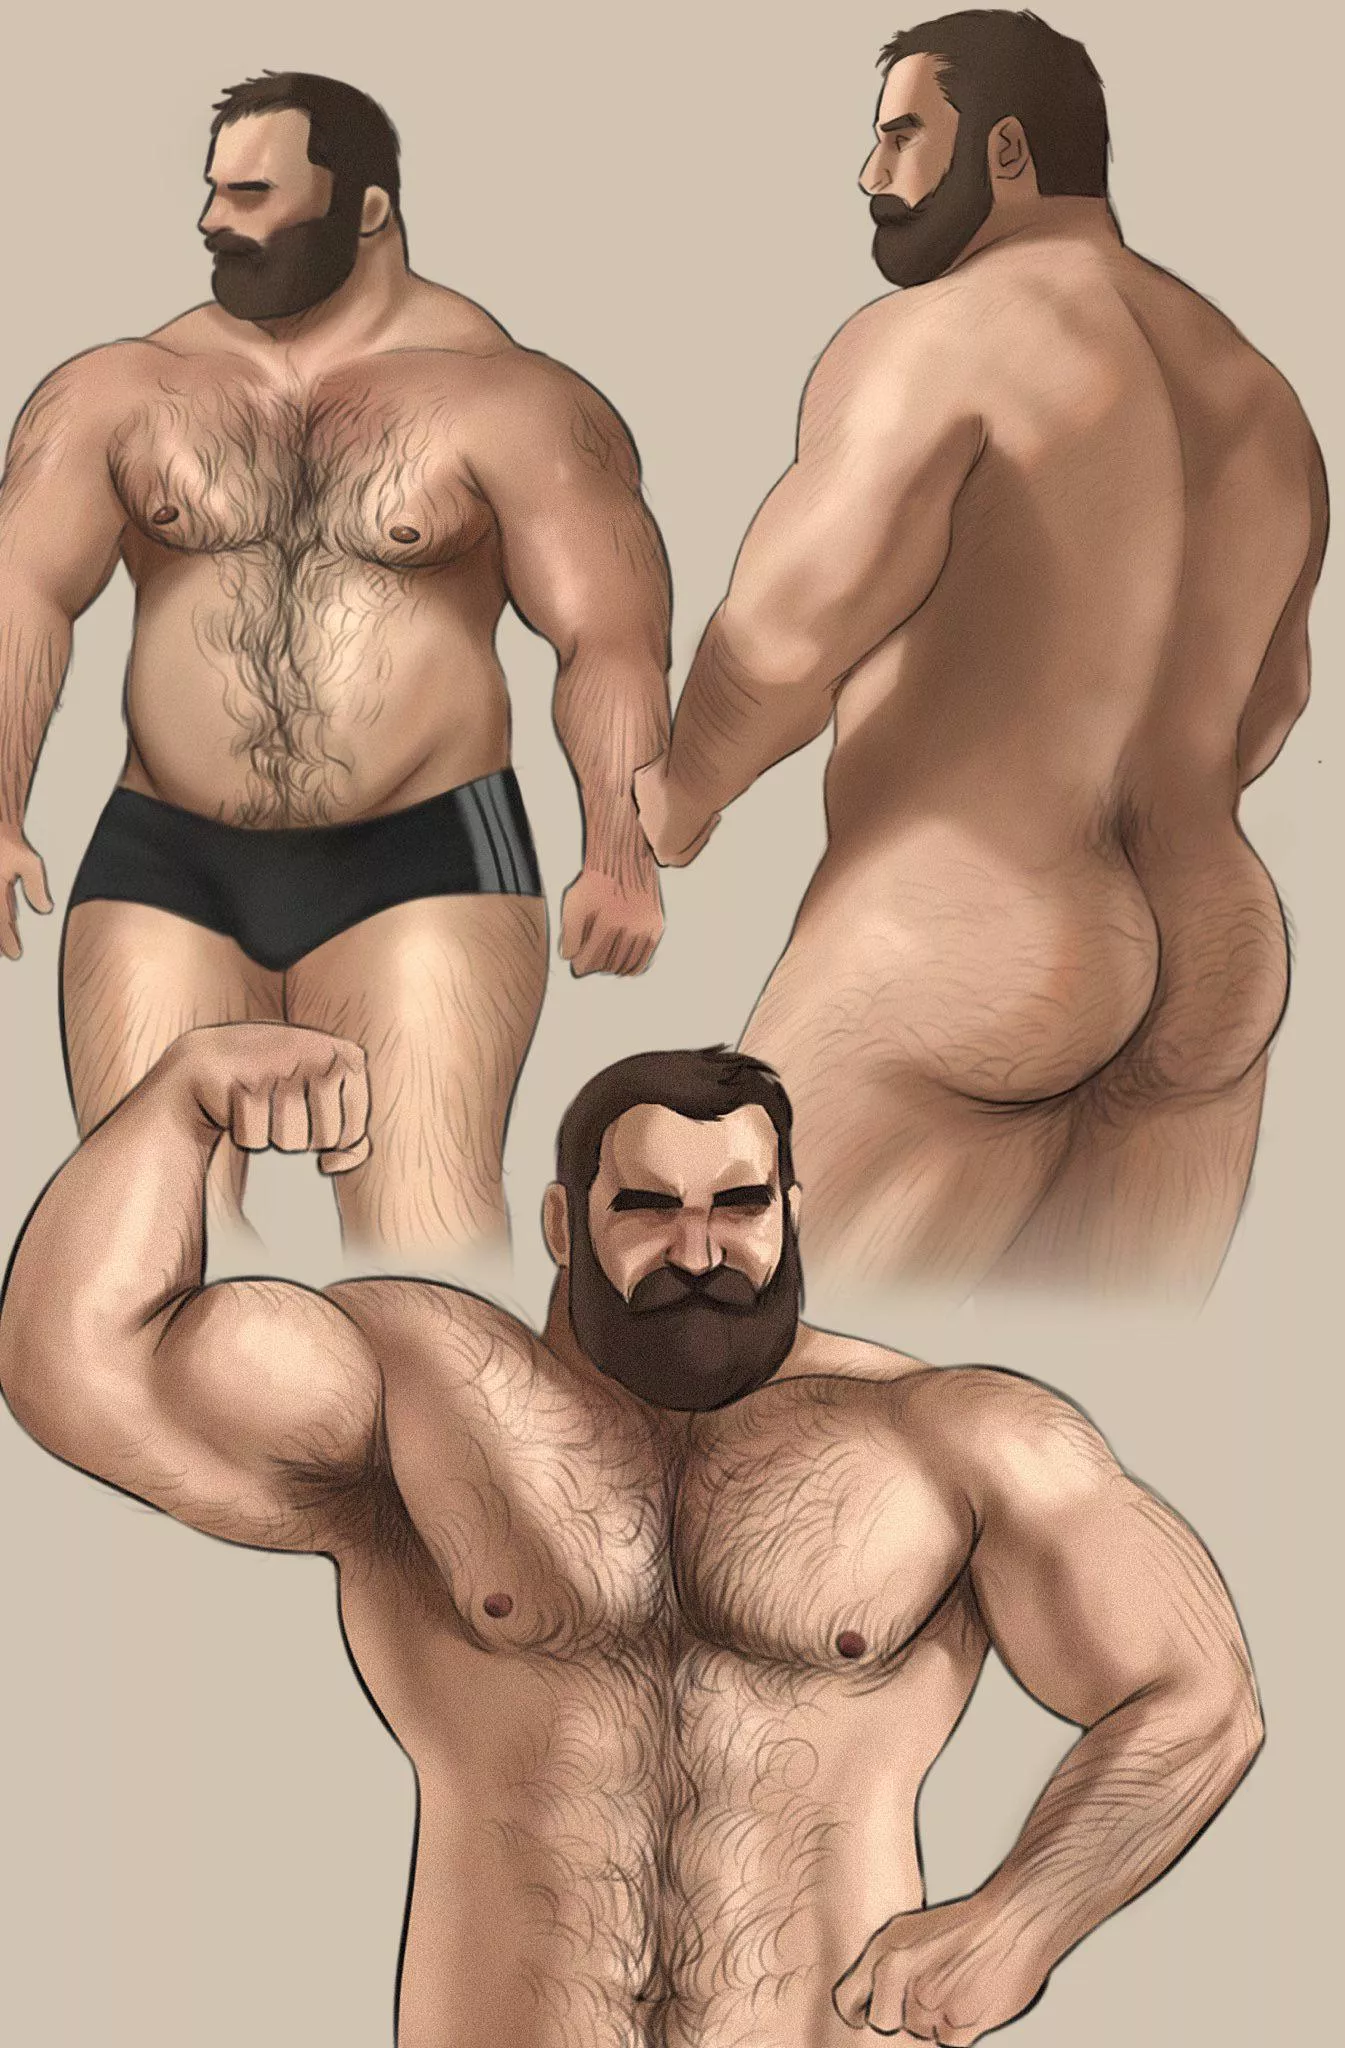 Thick muscle bear (art by me) nudes : baramanga | NUDE-PICS.ORG